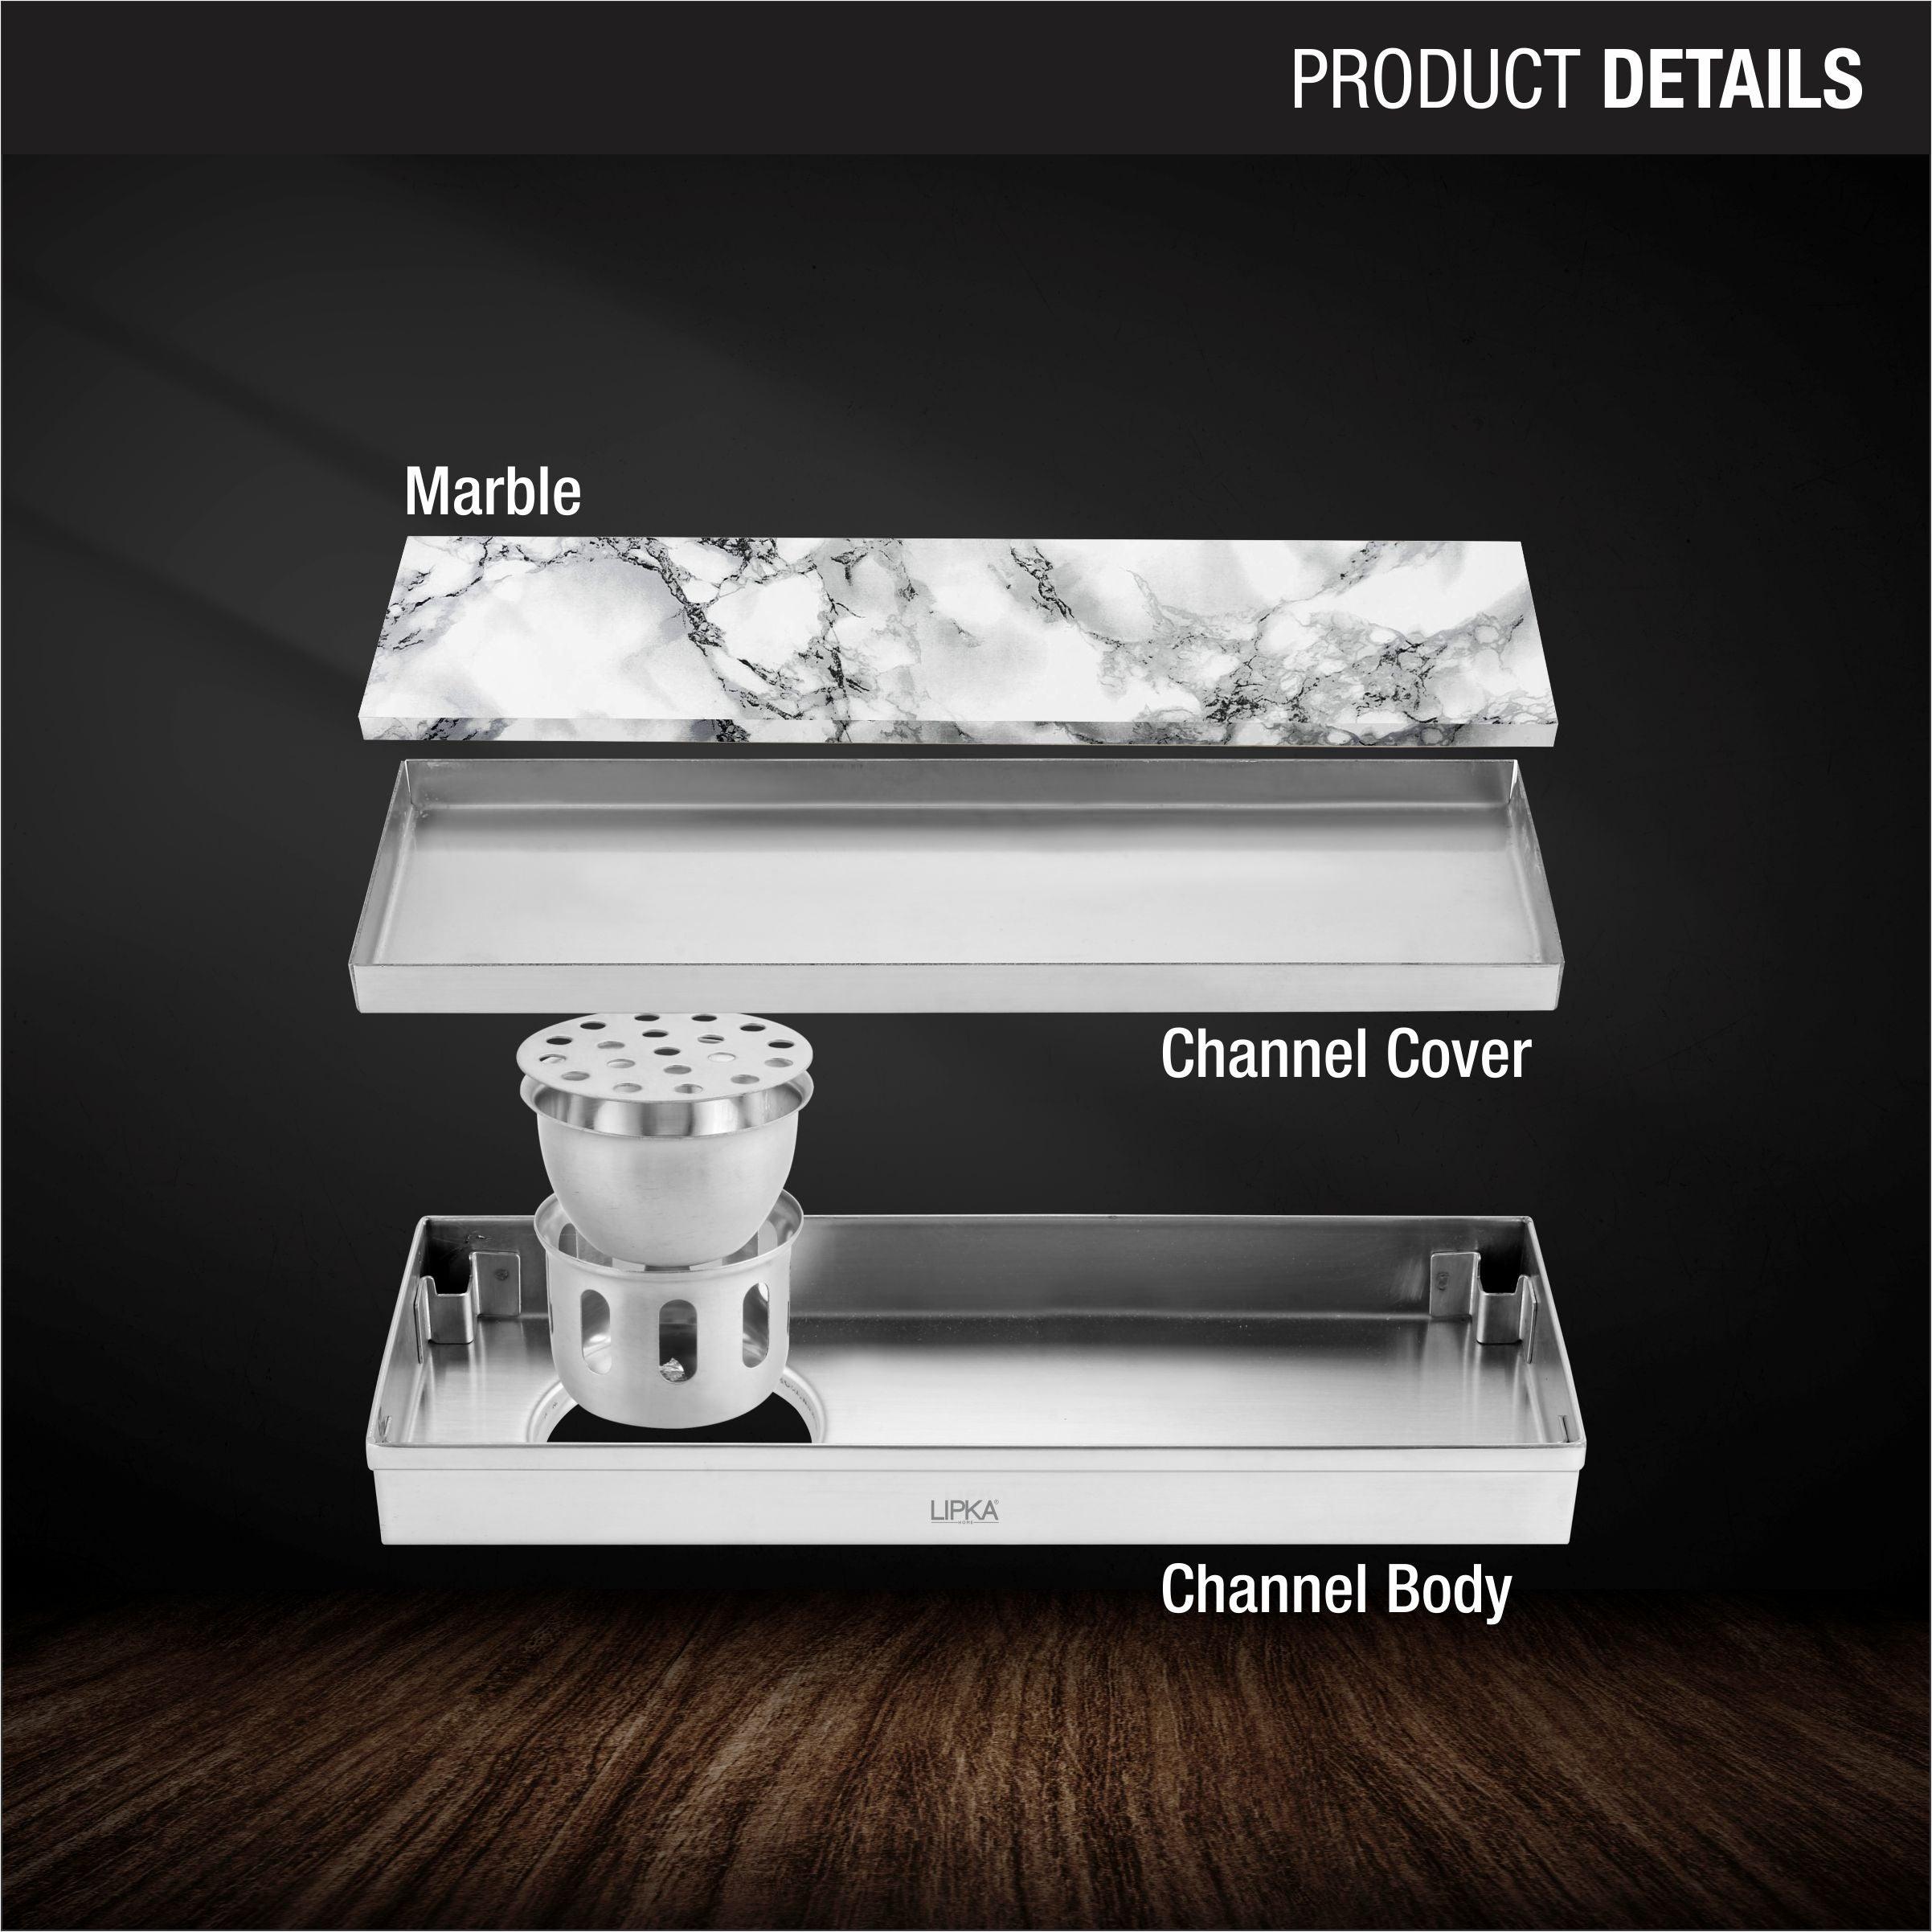 Marble Insert Shower Drain Channel (24 x 4 Inches) product details